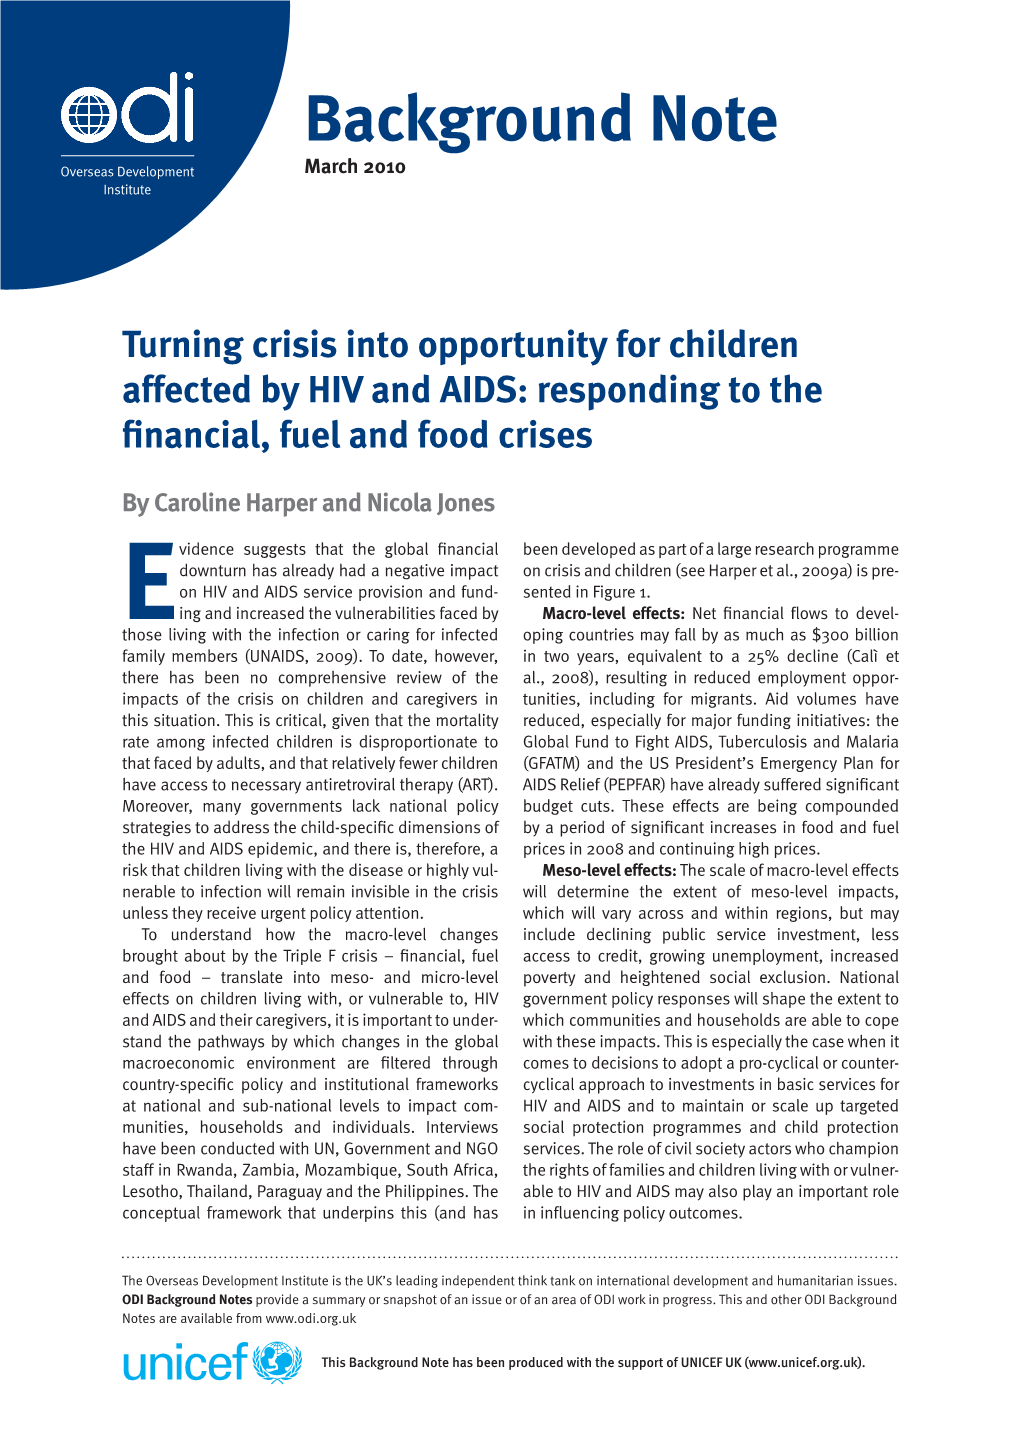 Turning Crisis Into Opportunity for Children Affected by HIV and AIDS: Responding to the Financial, Fuel and Food Crises